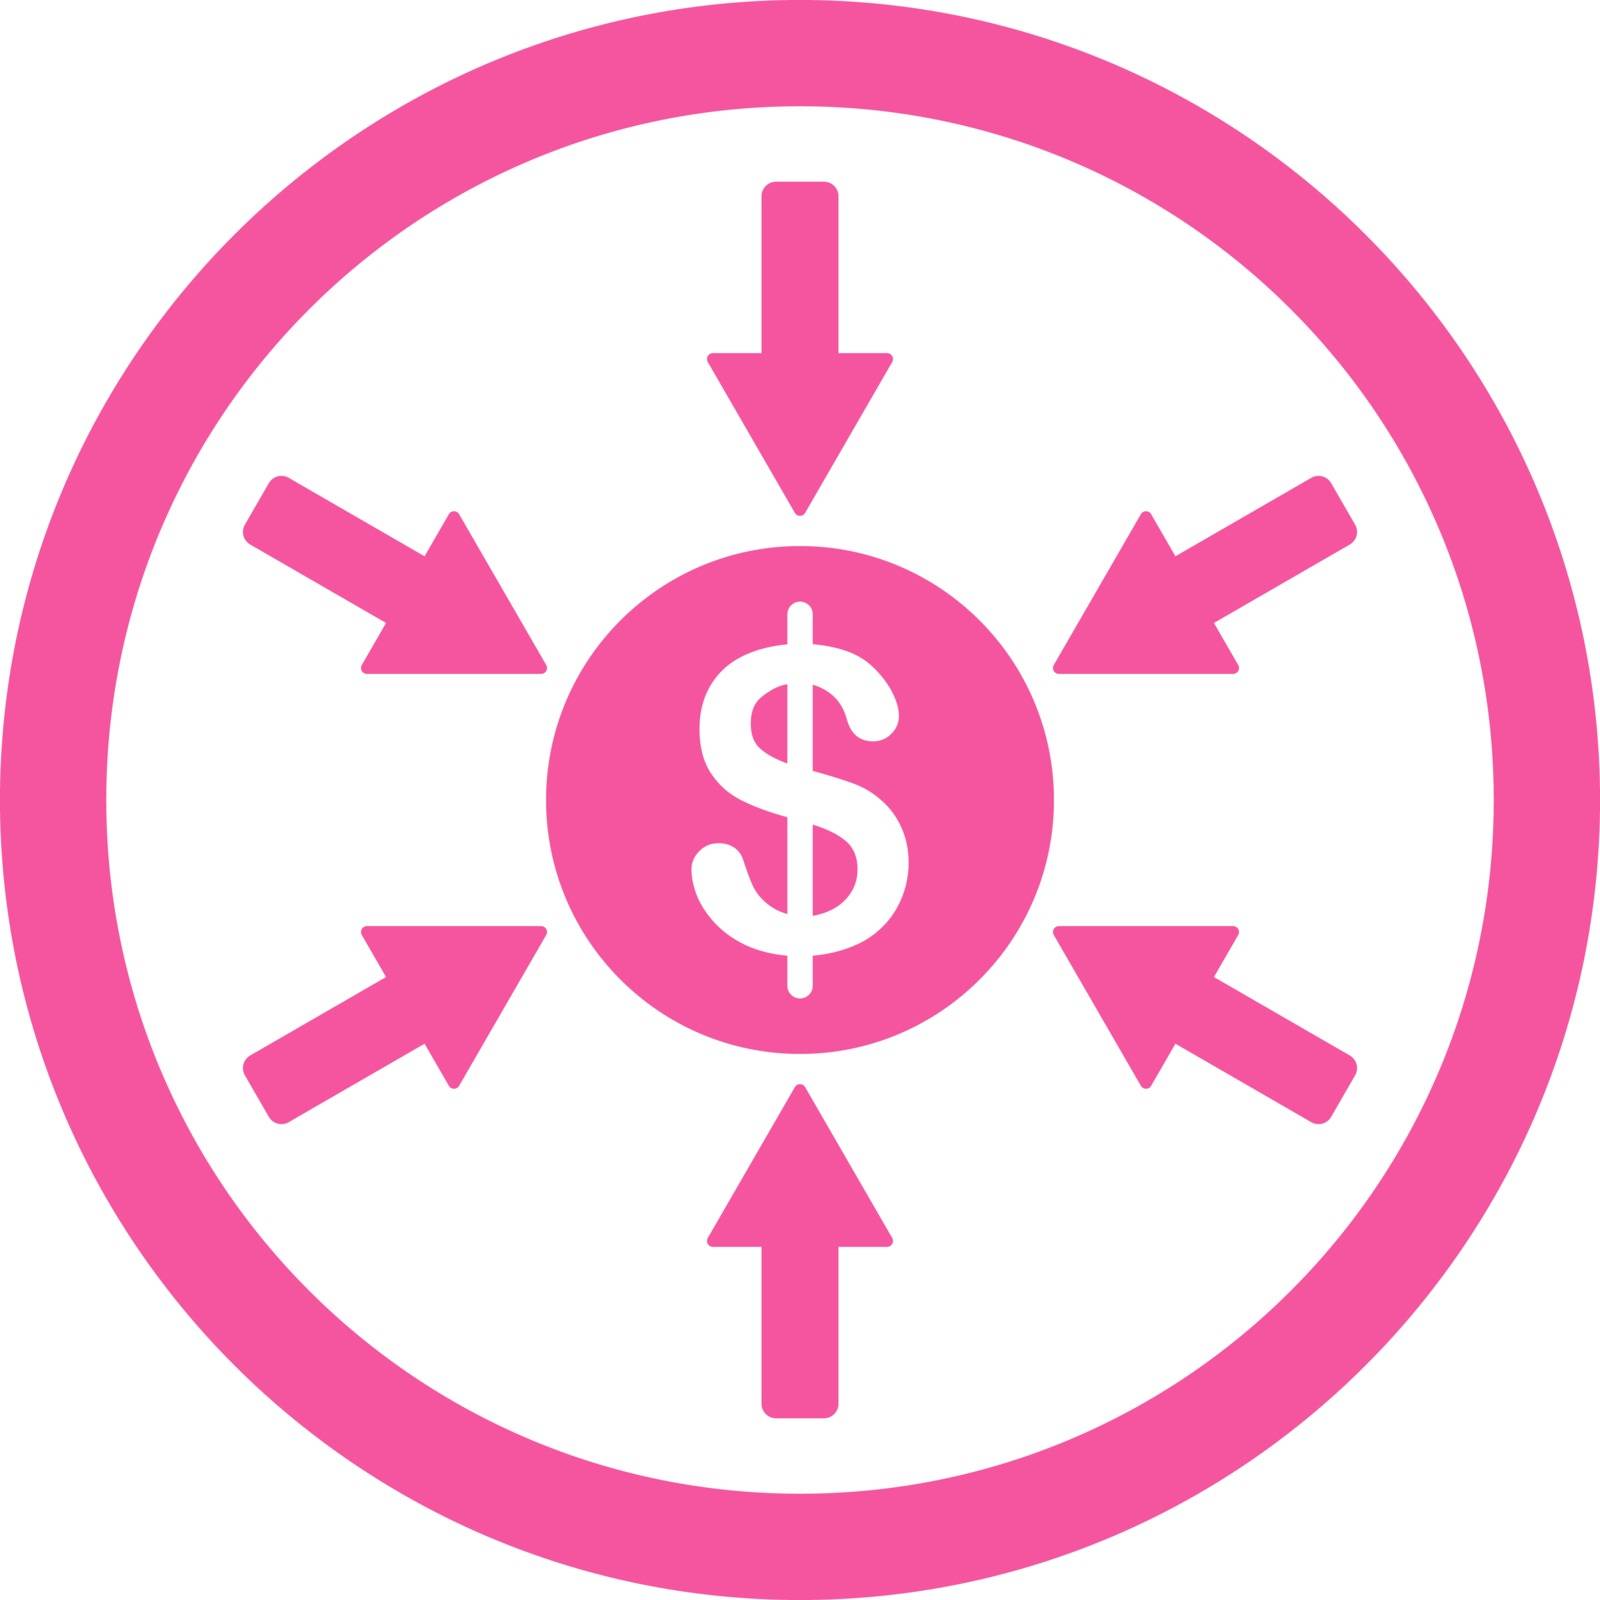 Income vector icon. This flat rounded symbol uses pink color and isolated on a white background.